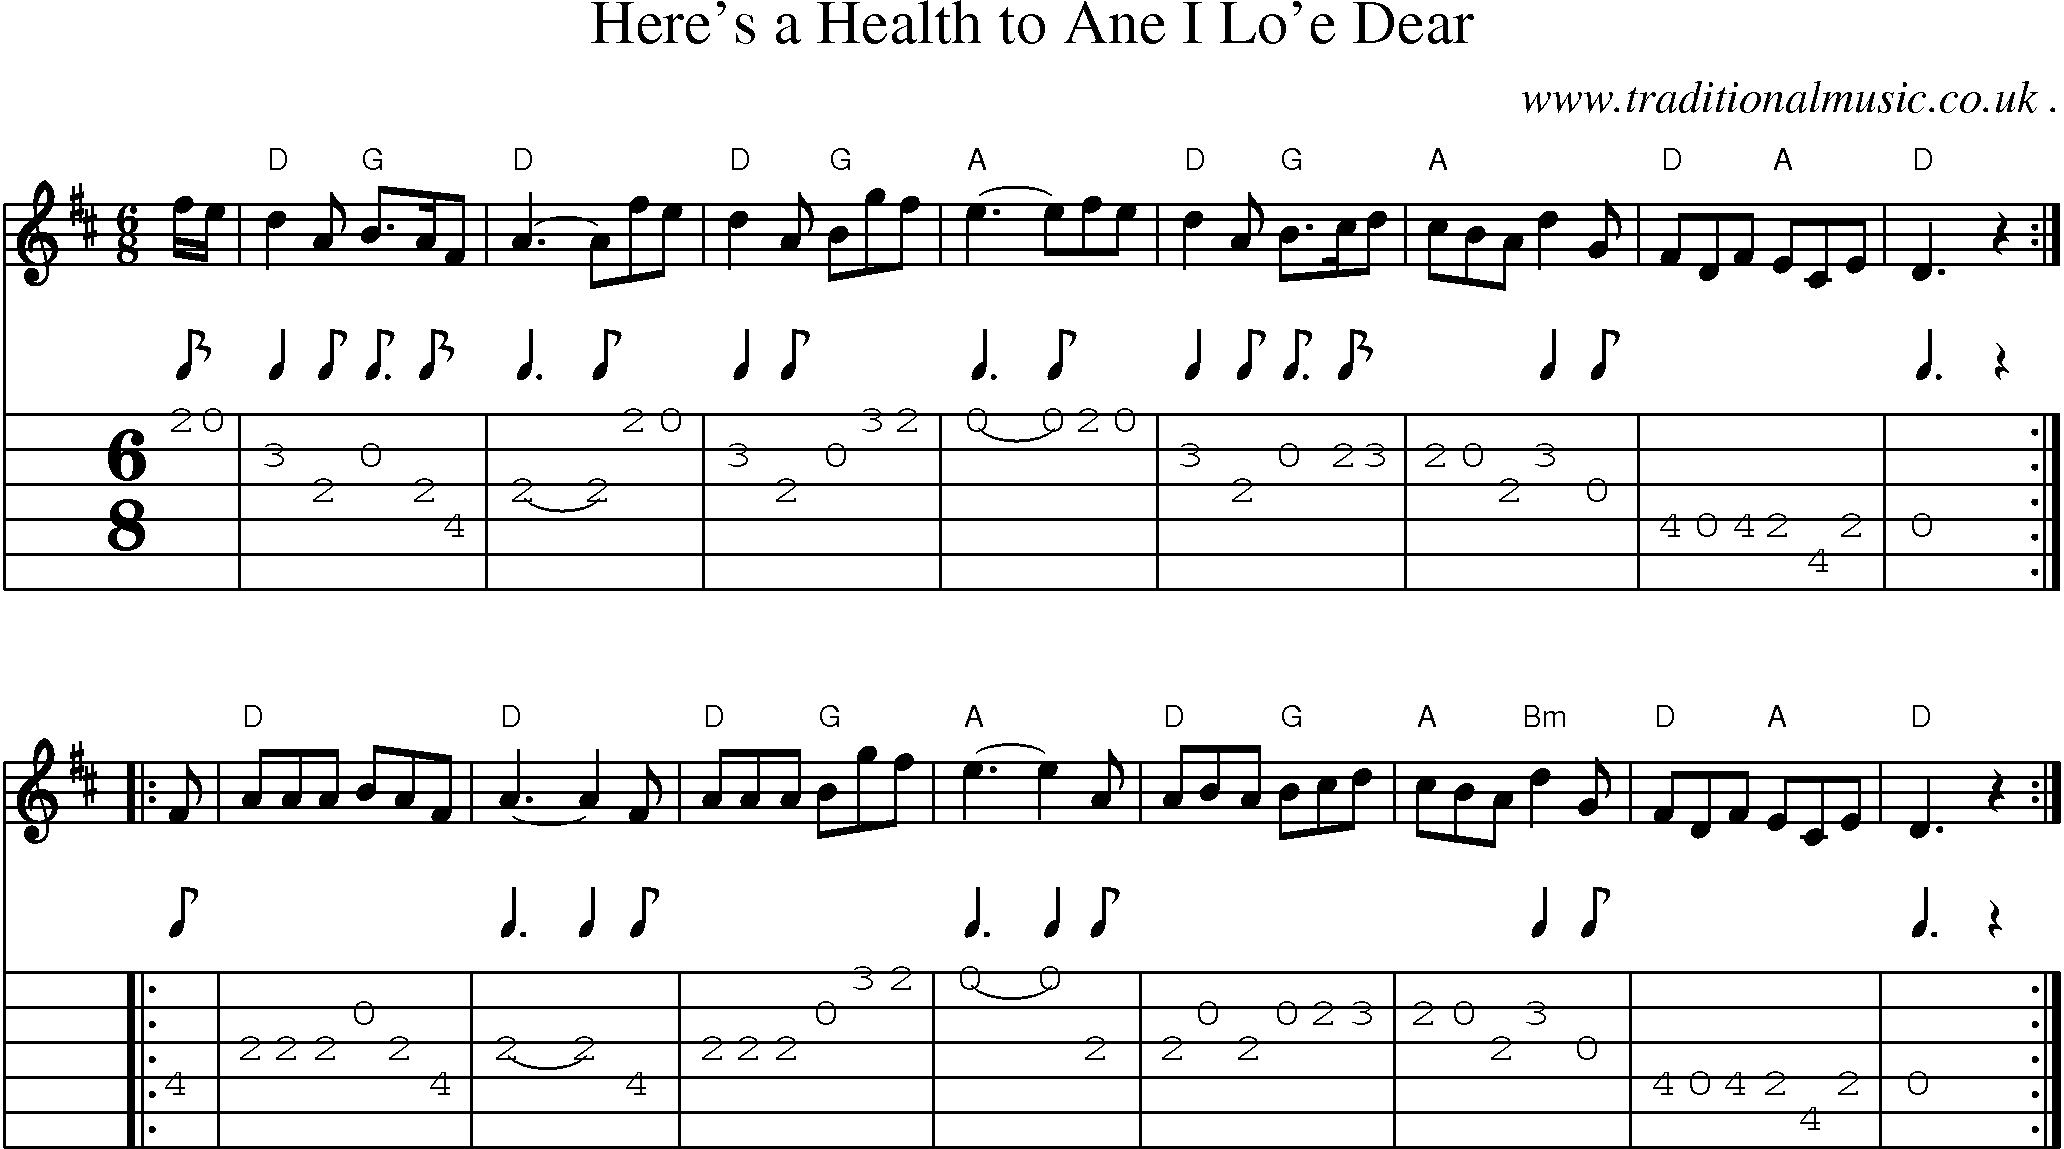 Sheet-music  score, Chords and Guitar Tabs for Heres A Health To Ane I Loe Dear